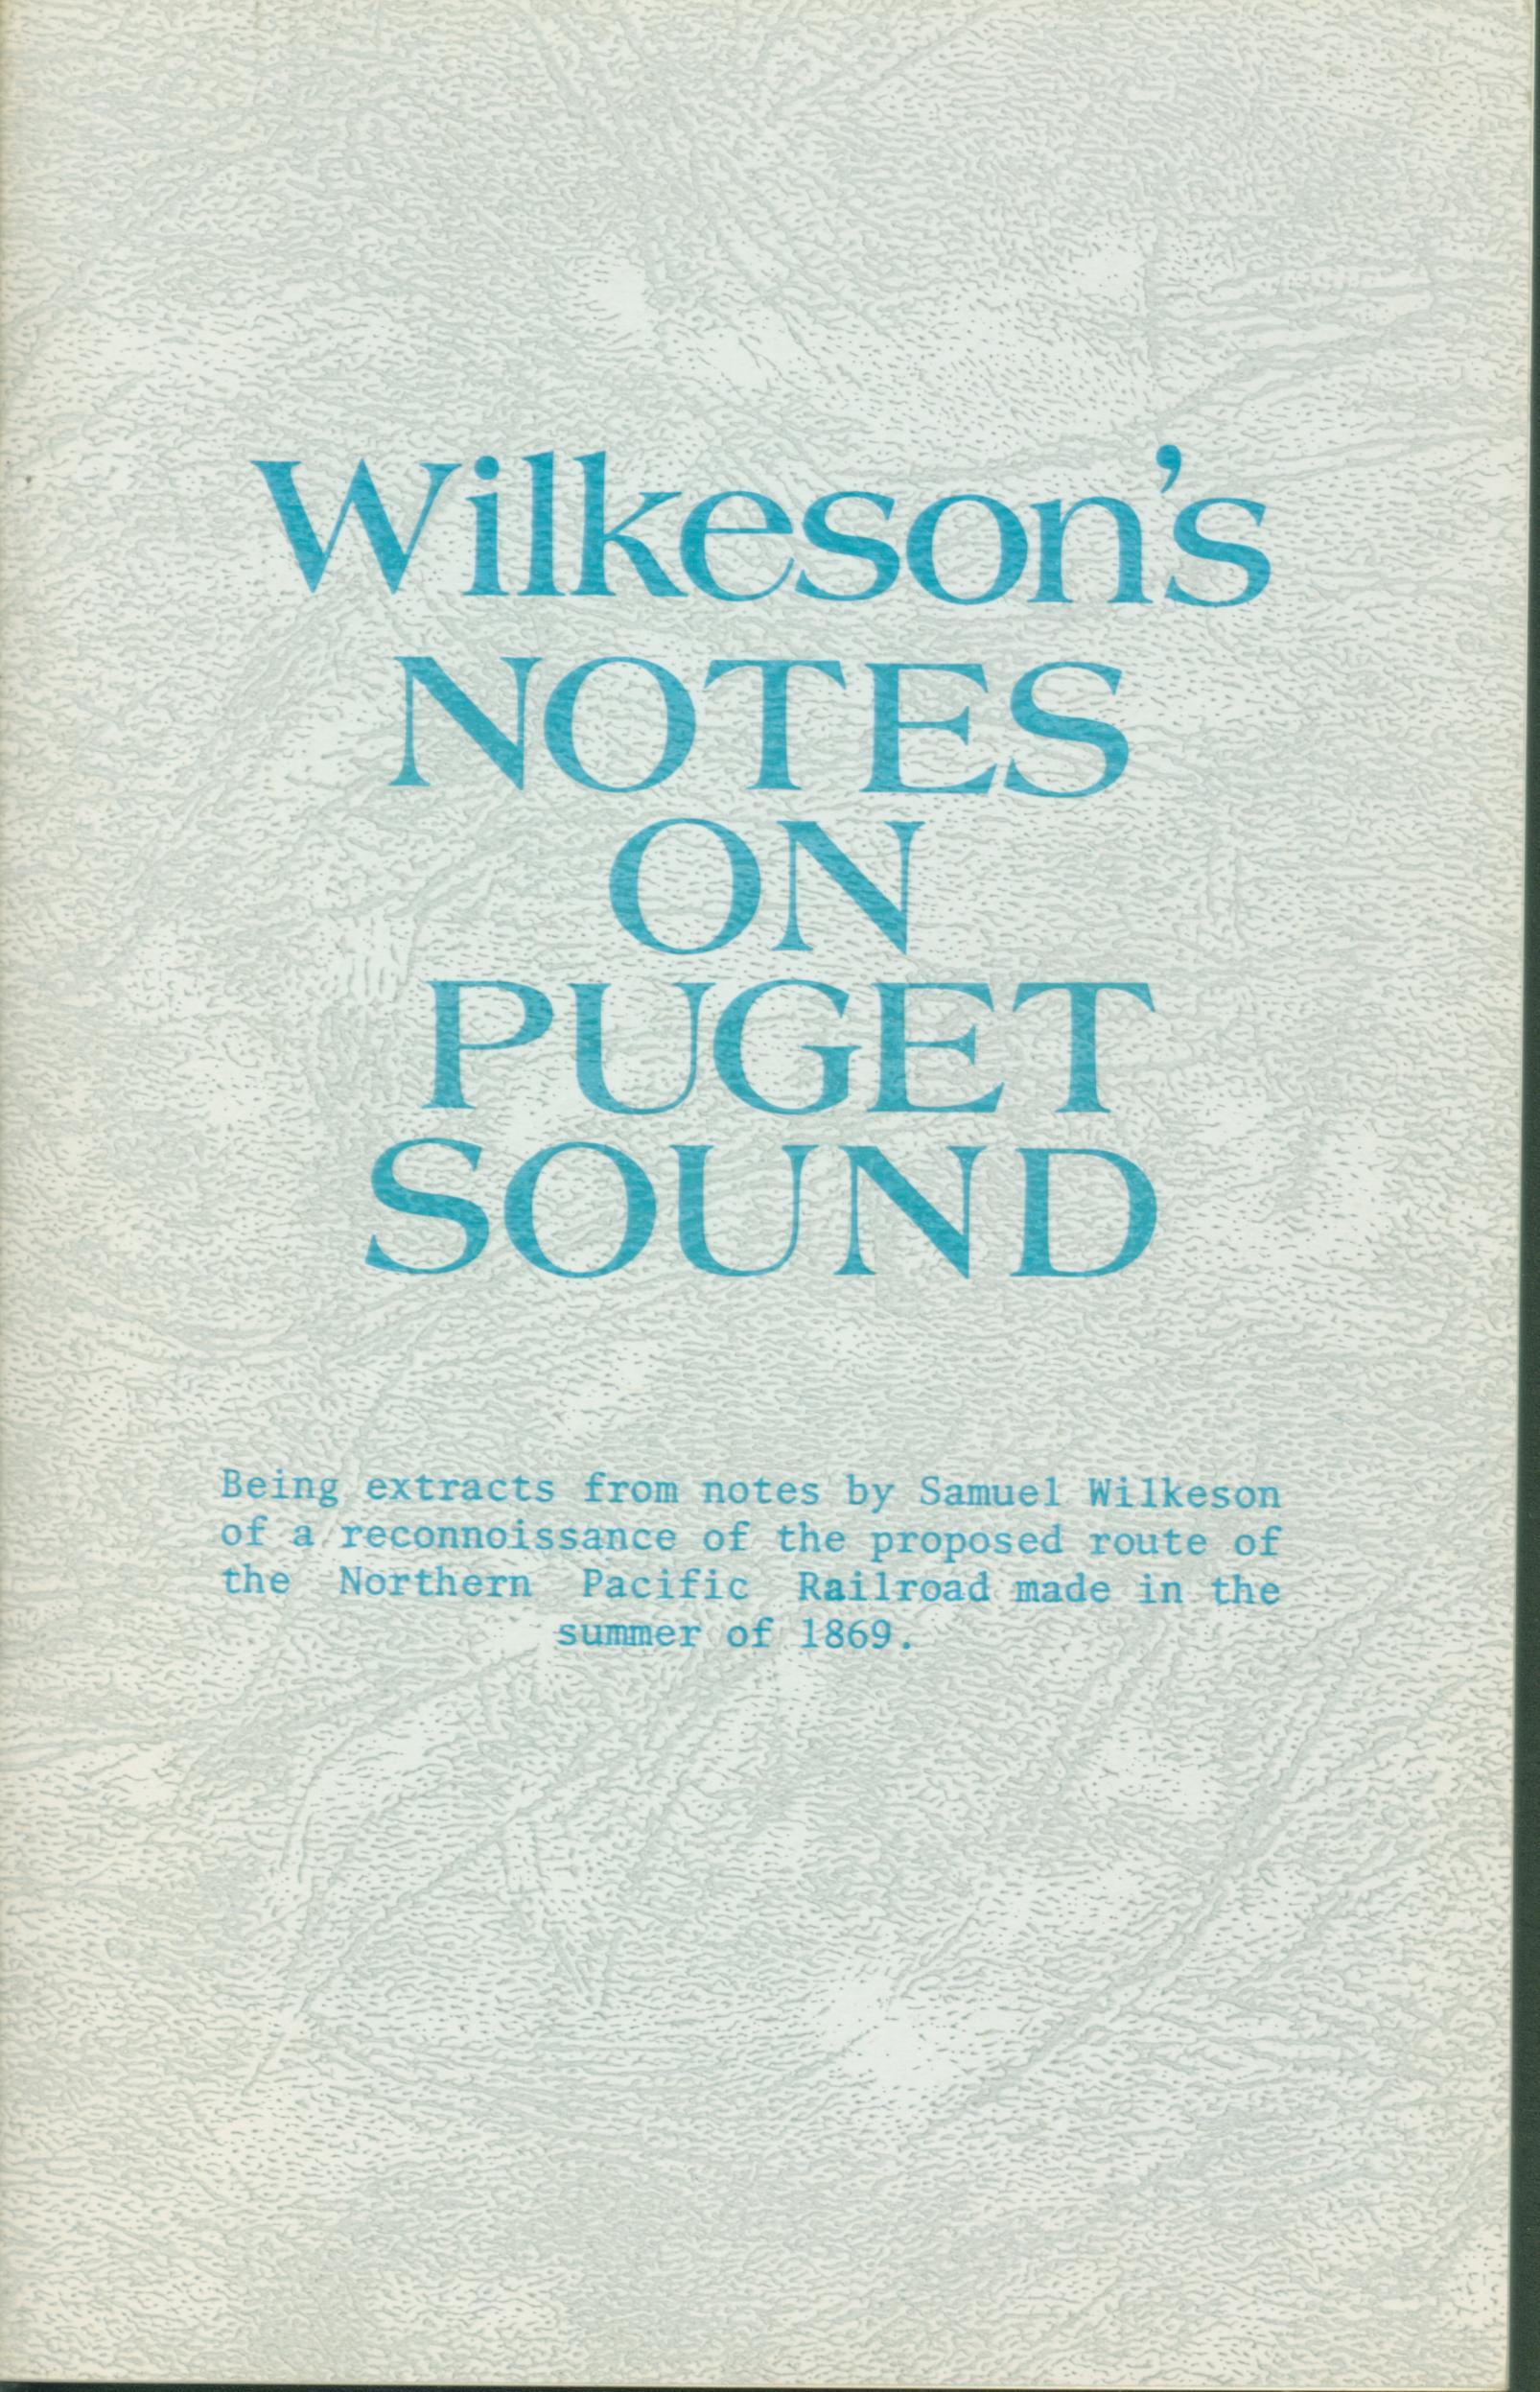 WILKESON'S NOTES ON PUGET SOUND.